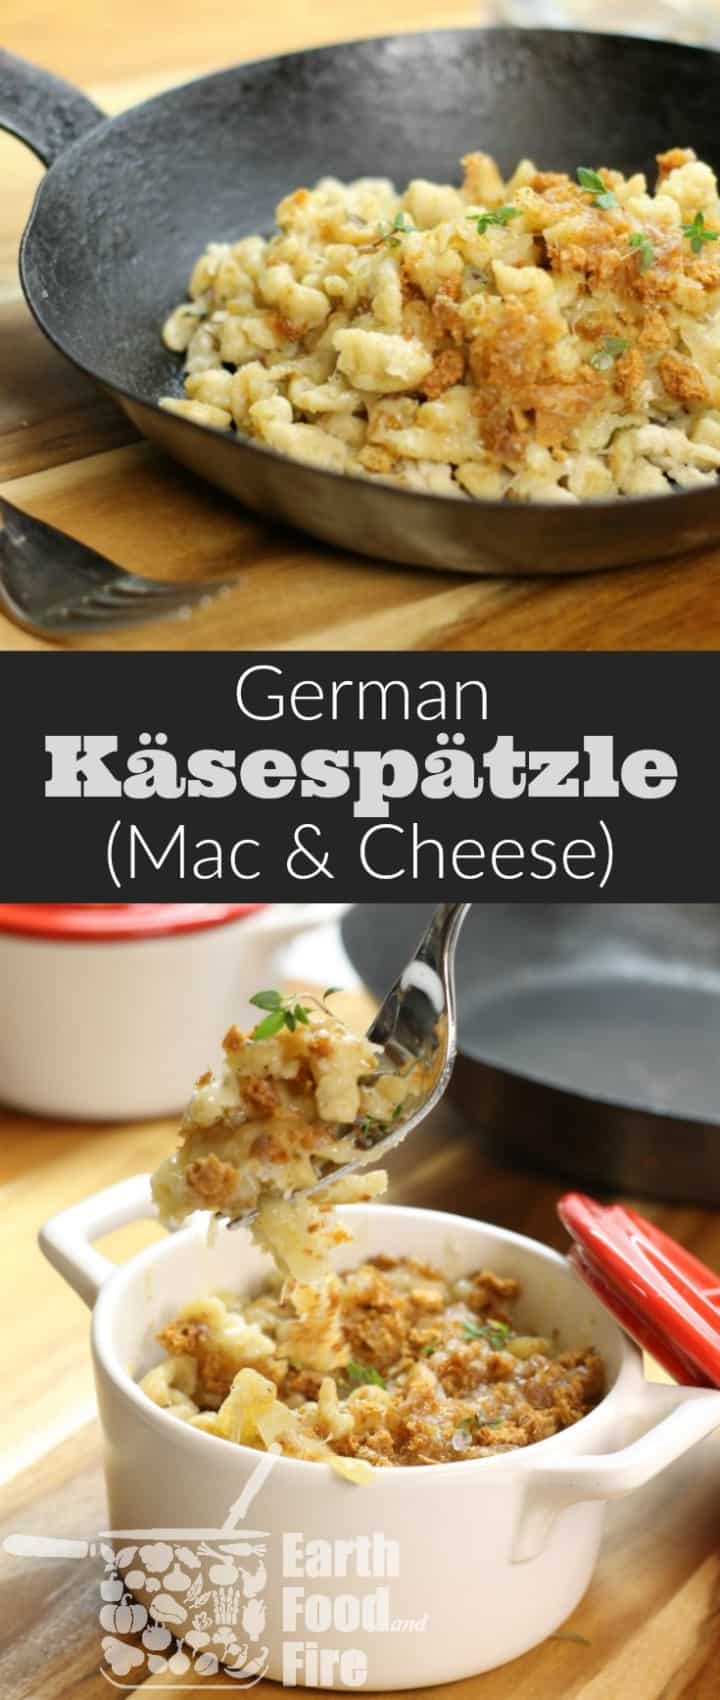 German käsespätzle also known as cheese spaetzle, is an easy to make noodle dish loaded with Emmental Cheese. Basically a fancy Mac & Cheese this traditional German dish is ideal for lunch or a quick supper! #spaetzle #cheese #macandcheese